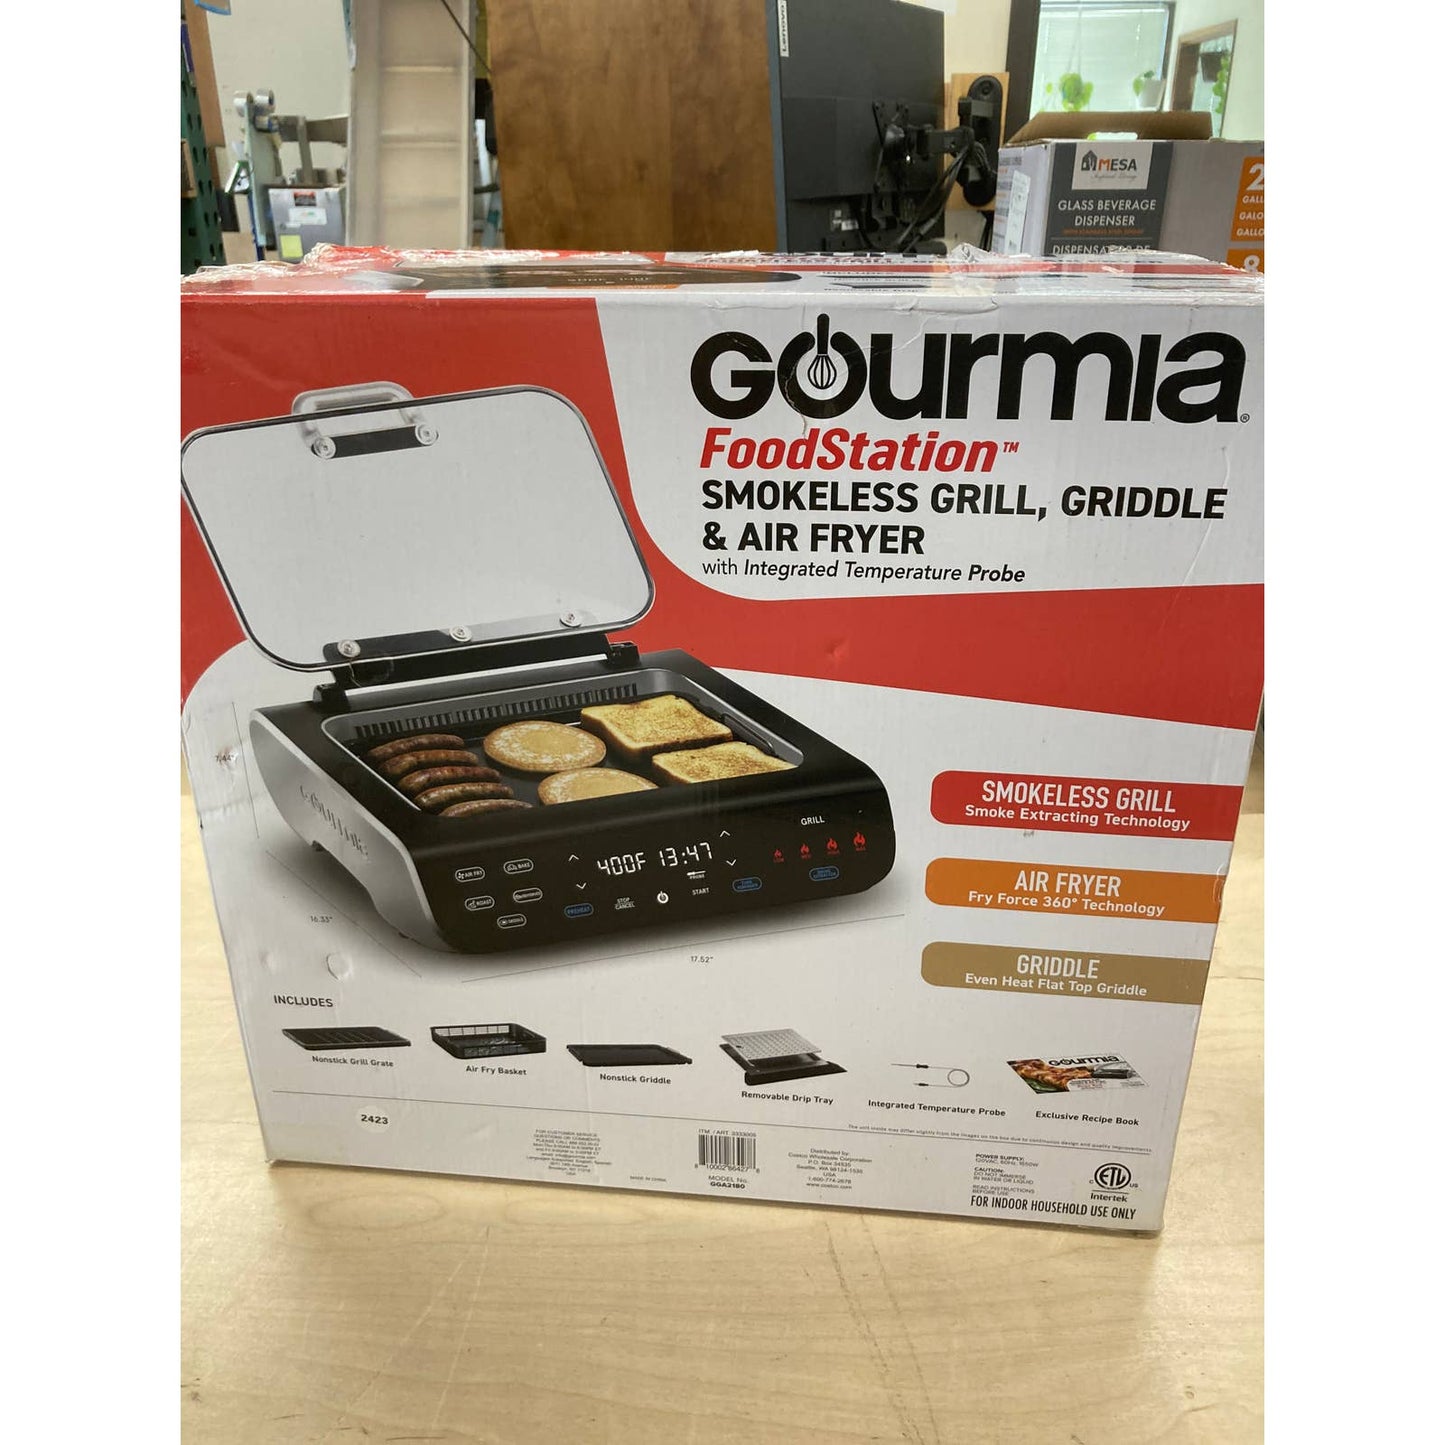 Costco - Gourmia FoodStation Smokeless Grill, Griddle, & Air Fryer with Integrated Temperature Probe - Retail $99